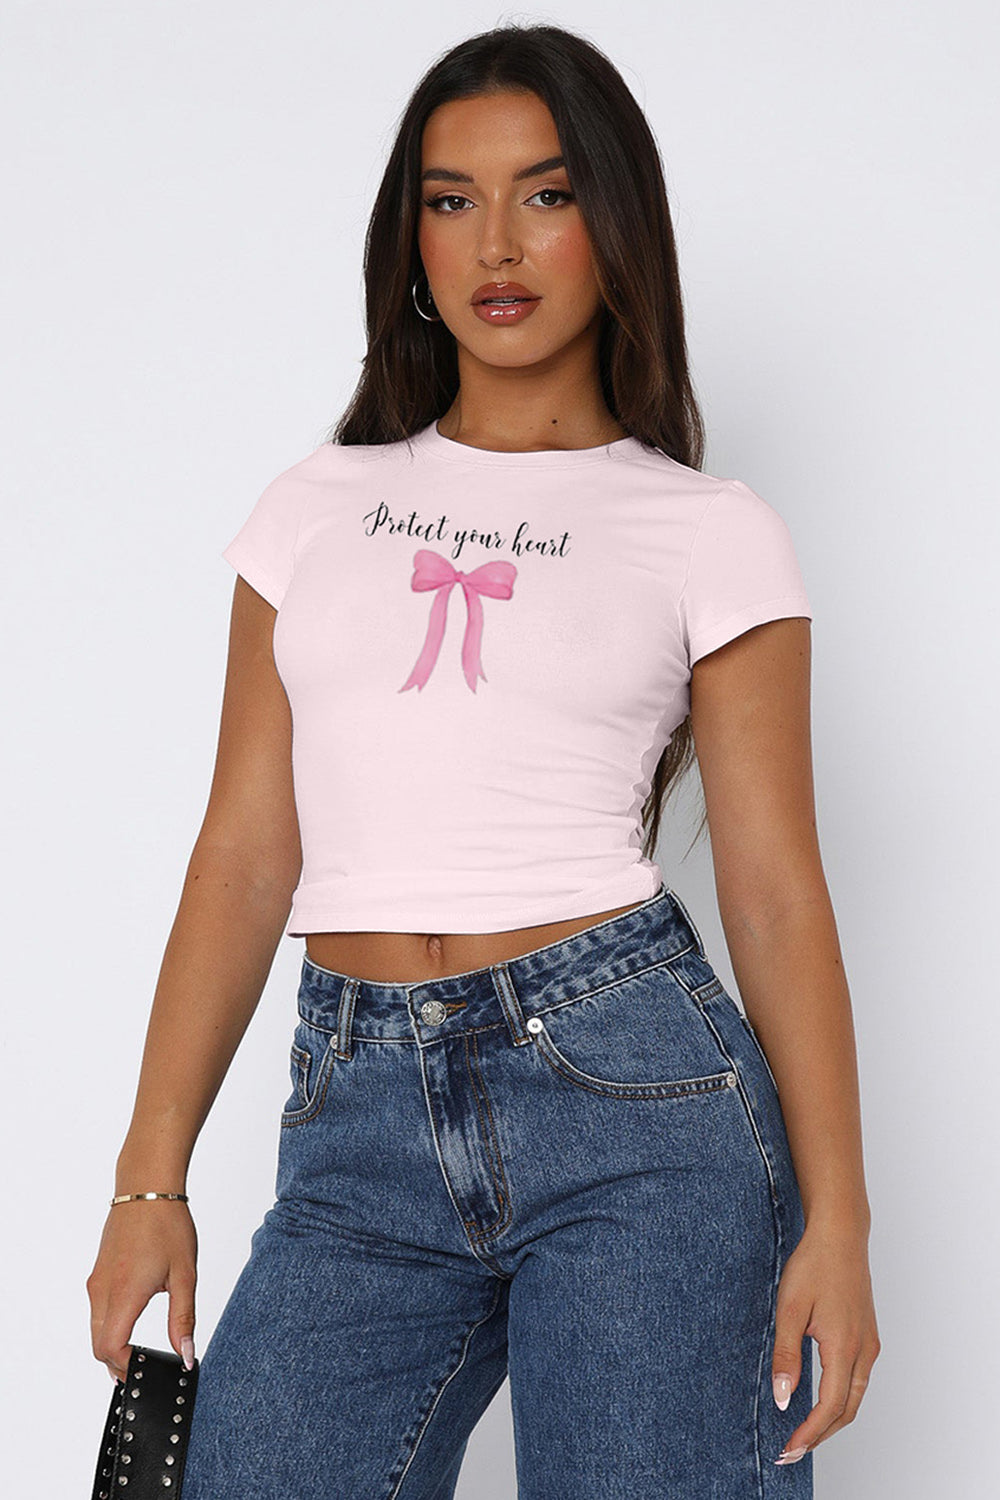 Graphic T Shirt Protect Your Heart Quote Bow Round Neck Short Sleeve Crop Top Women's Fashion